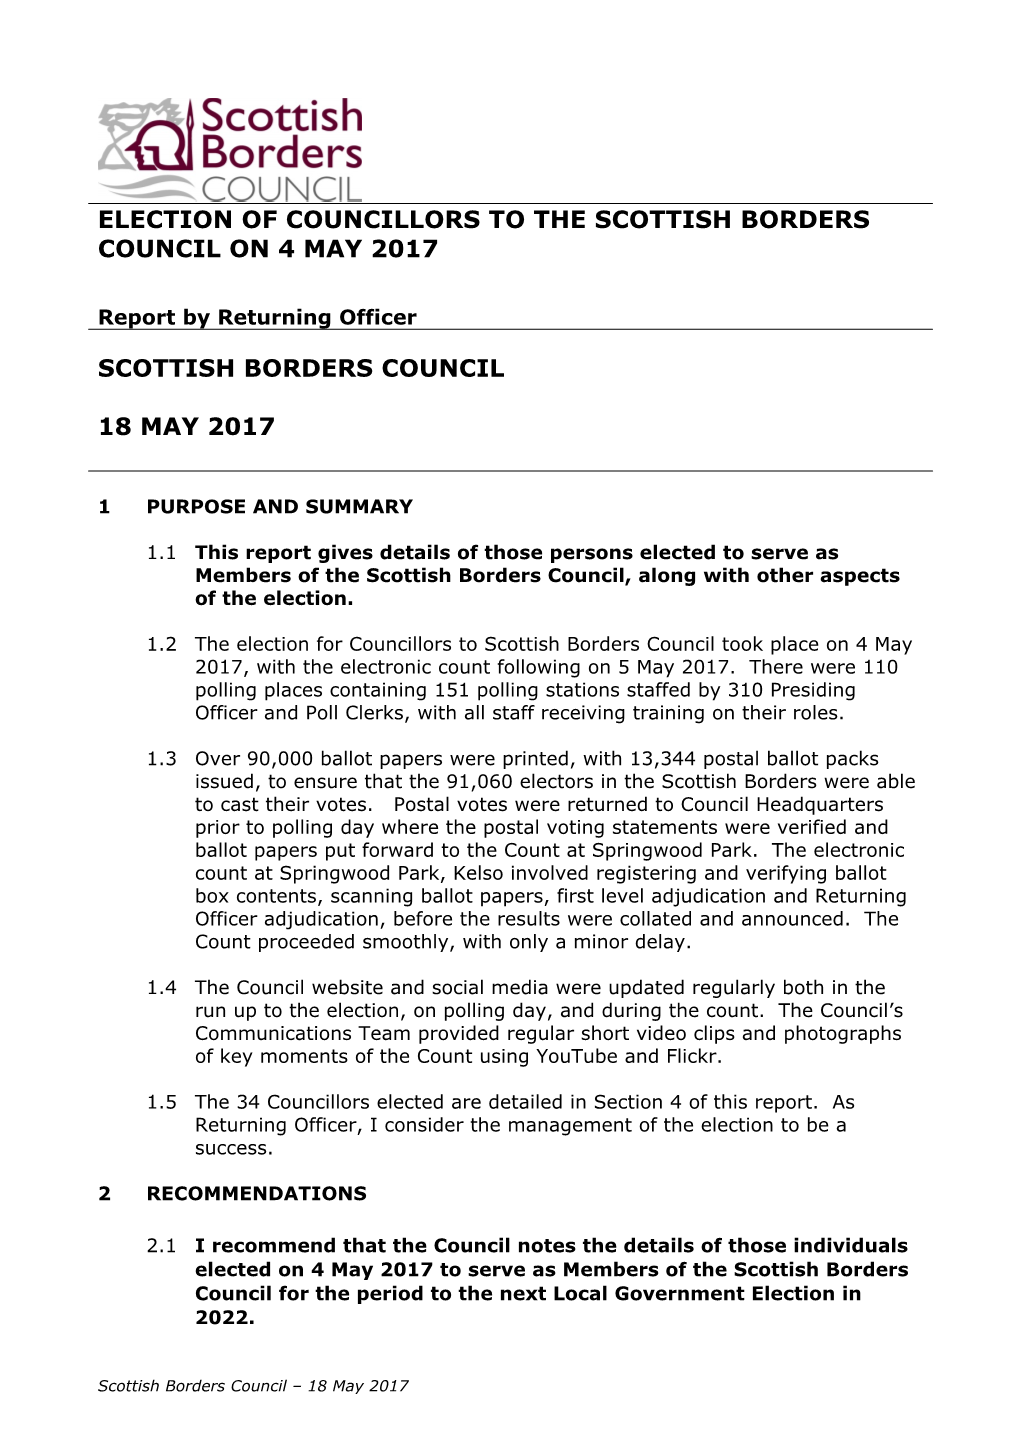 Election of Councillors to the Scottish Borders Council on 4 May 2017